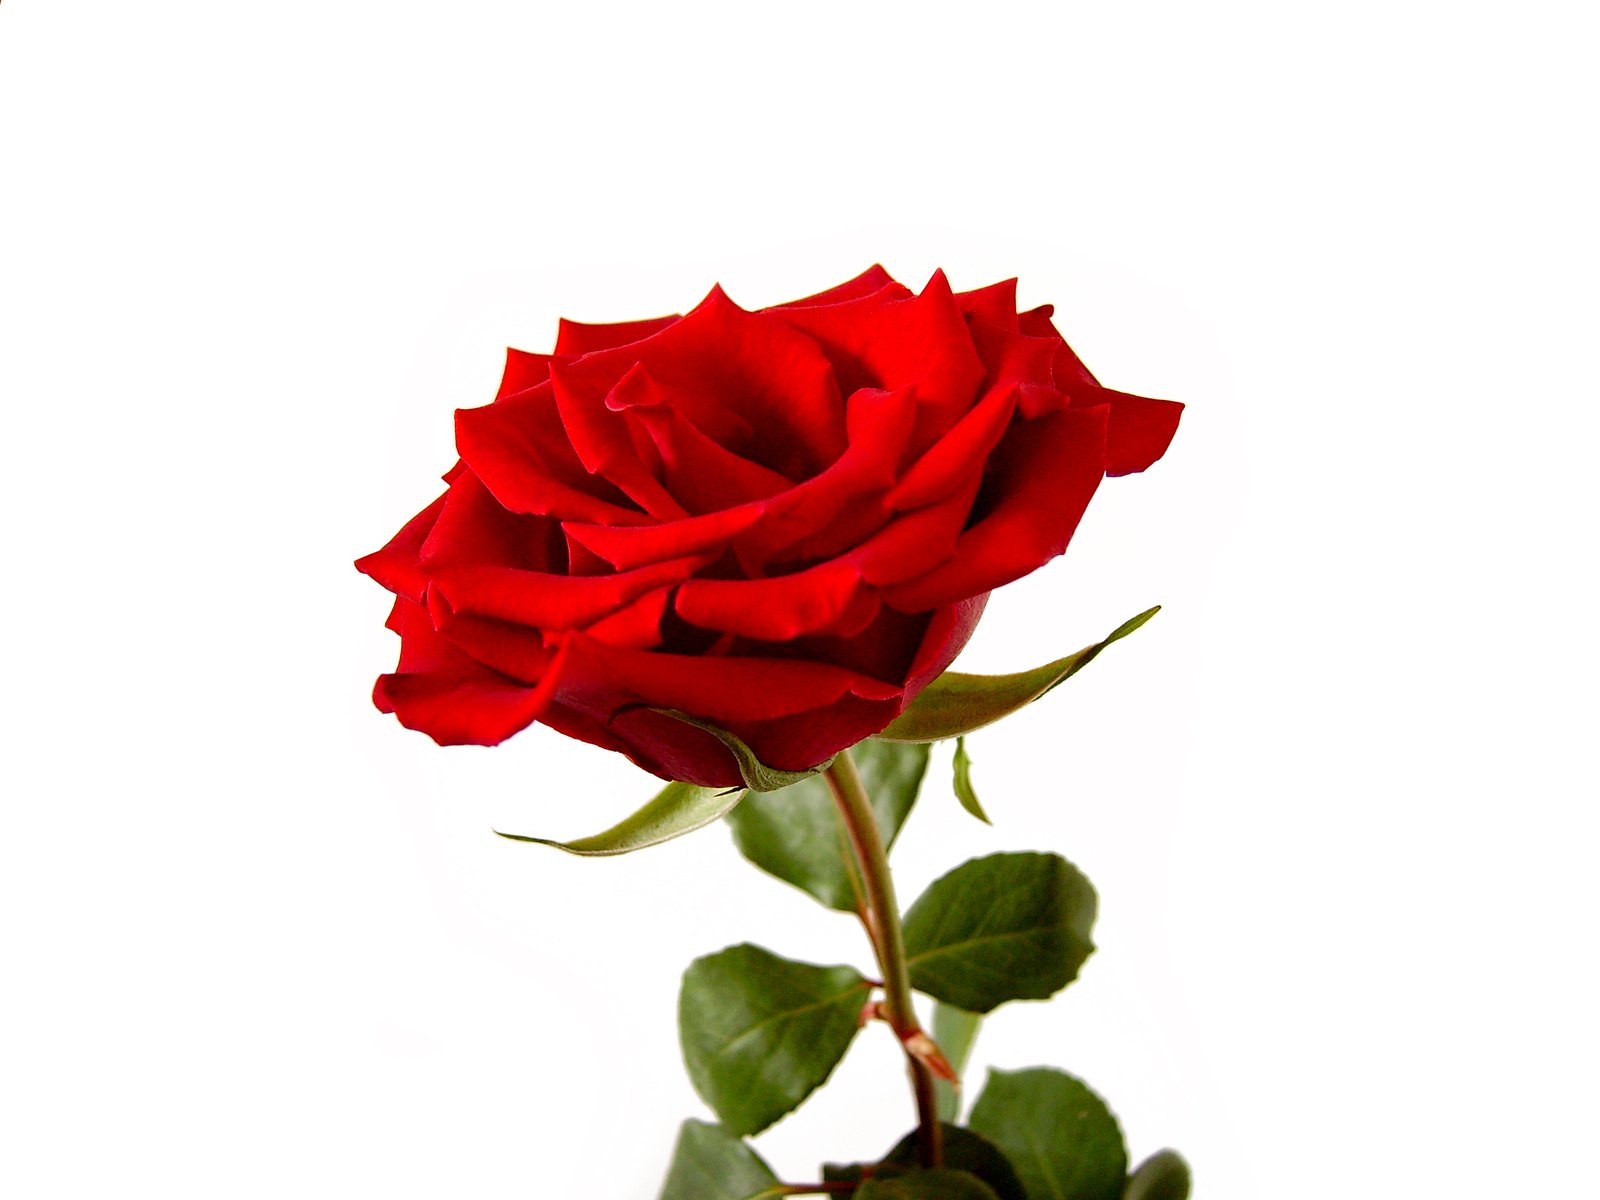 an image of a red rose in the vase